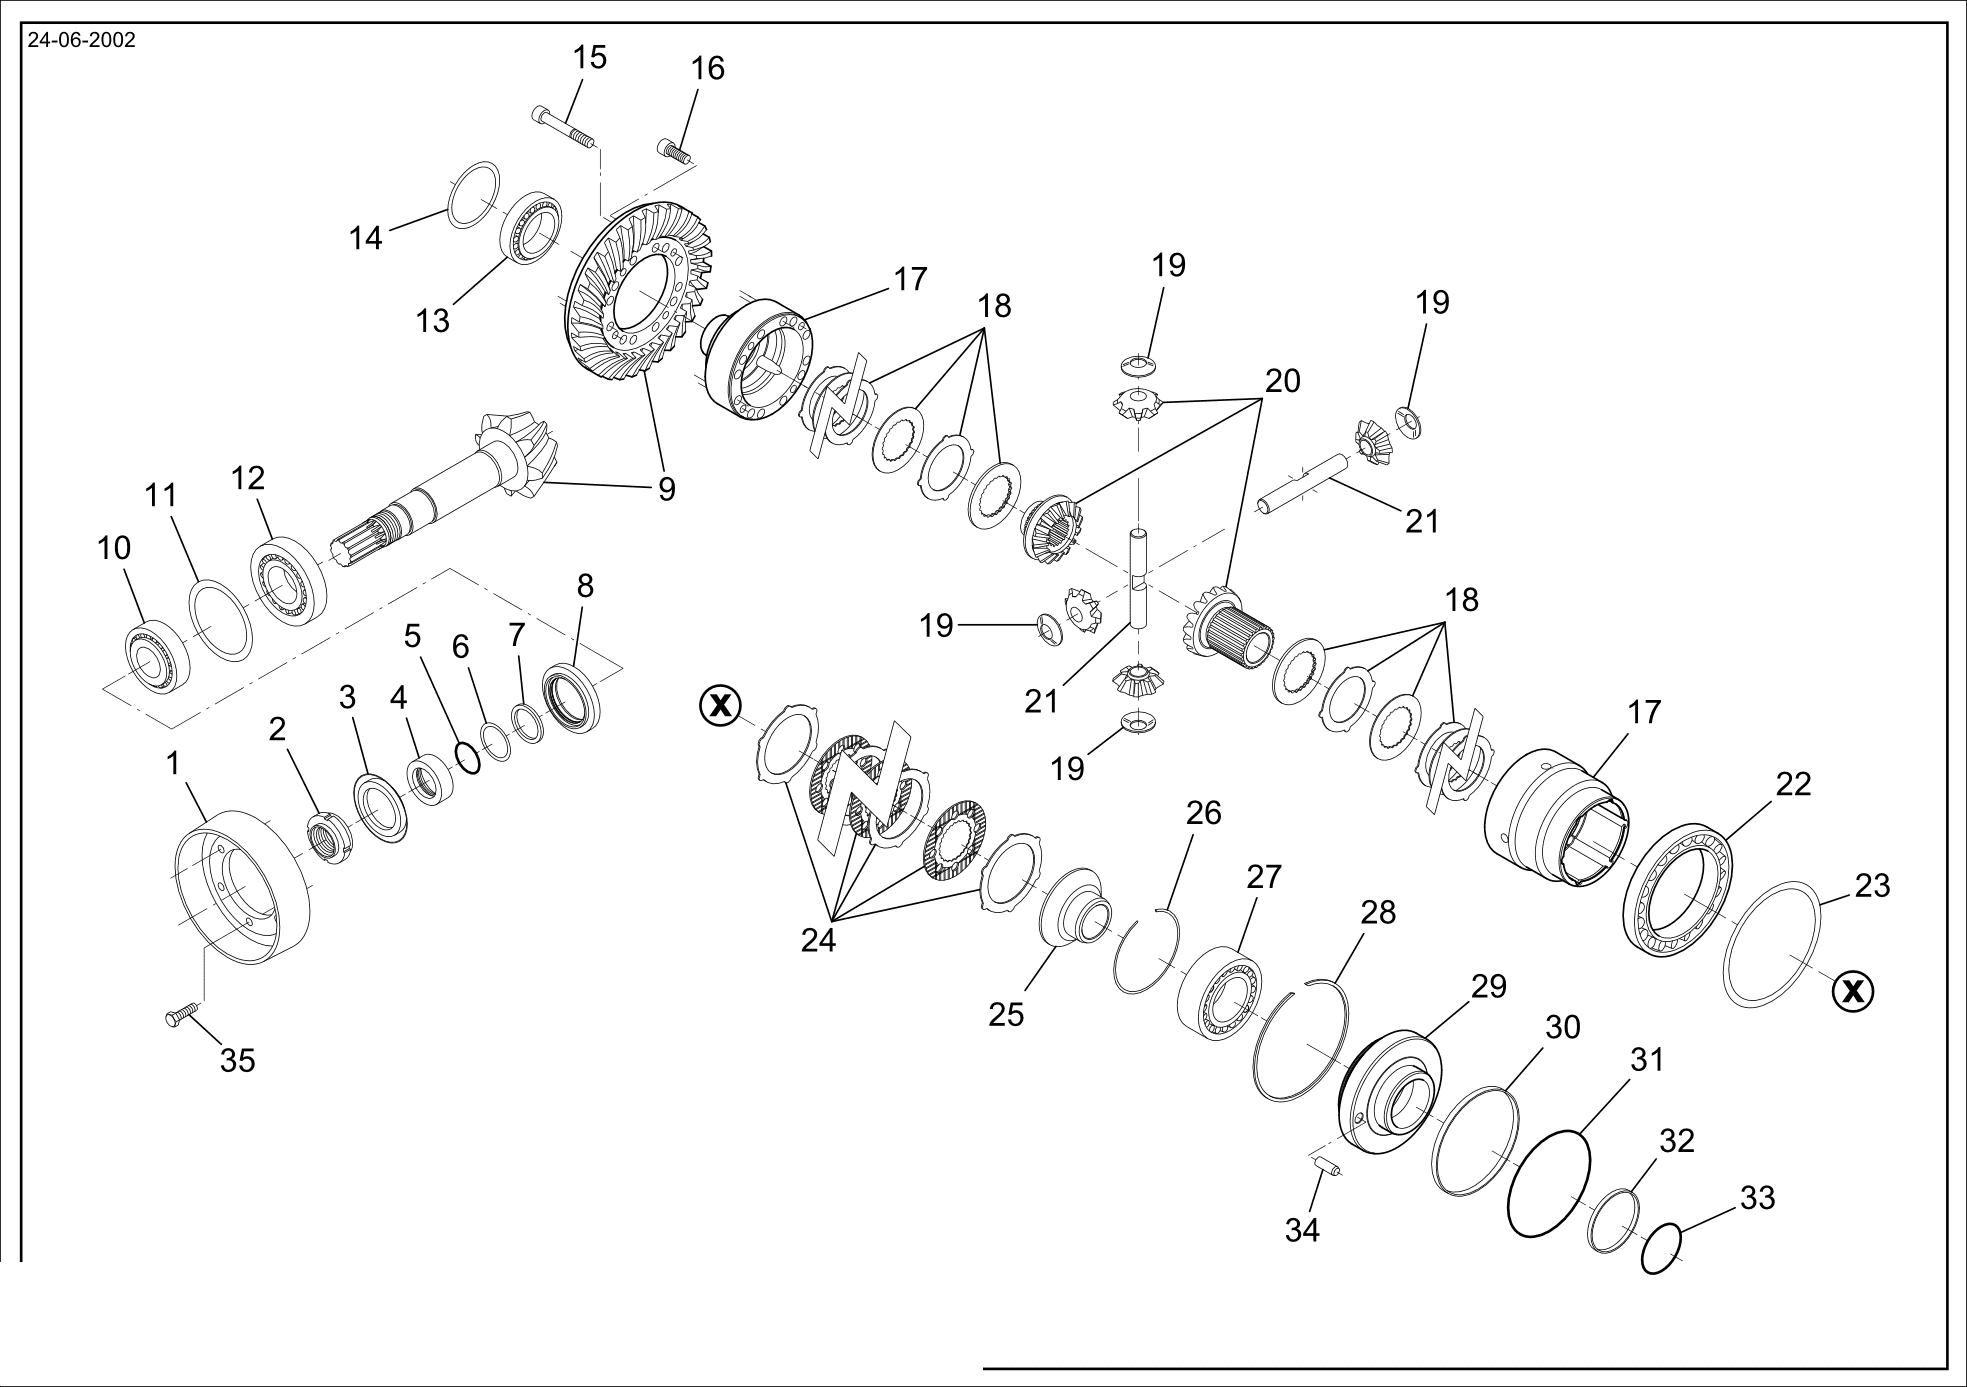 drawing for AGCO F737300020160 - BEVEL GEAR SET (figure 1)